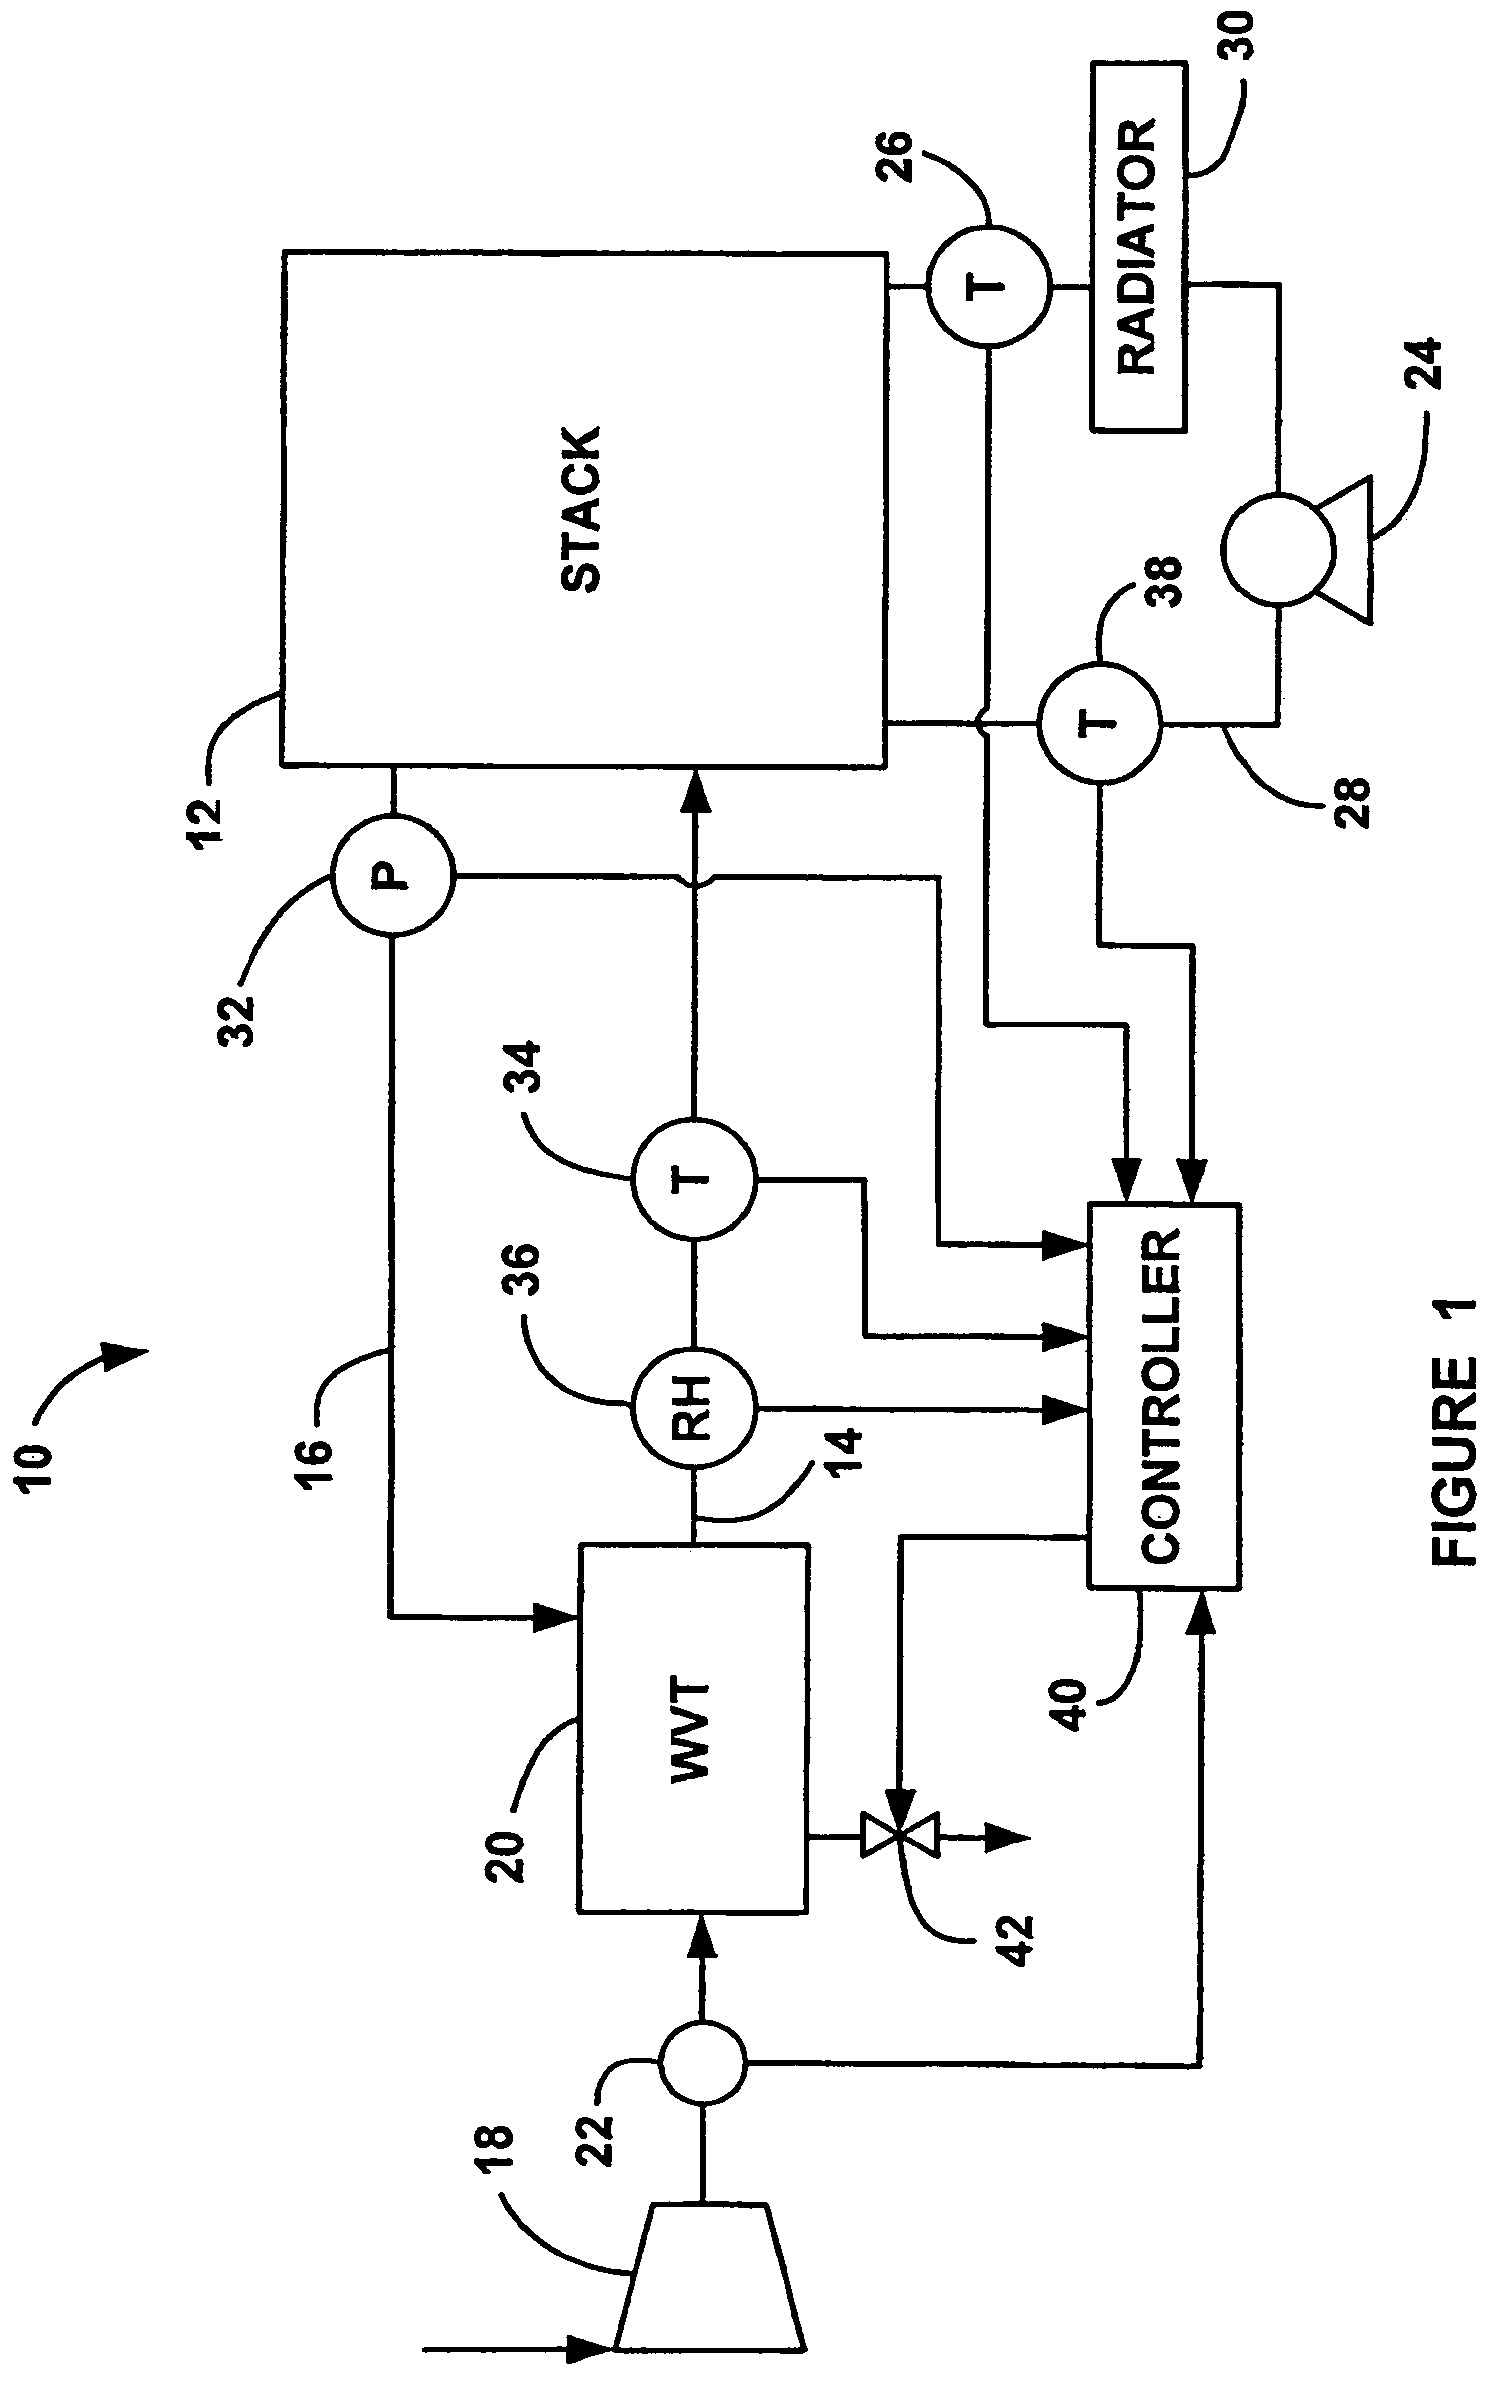 Multiple pressure regime control to minimize RH excursions during transients